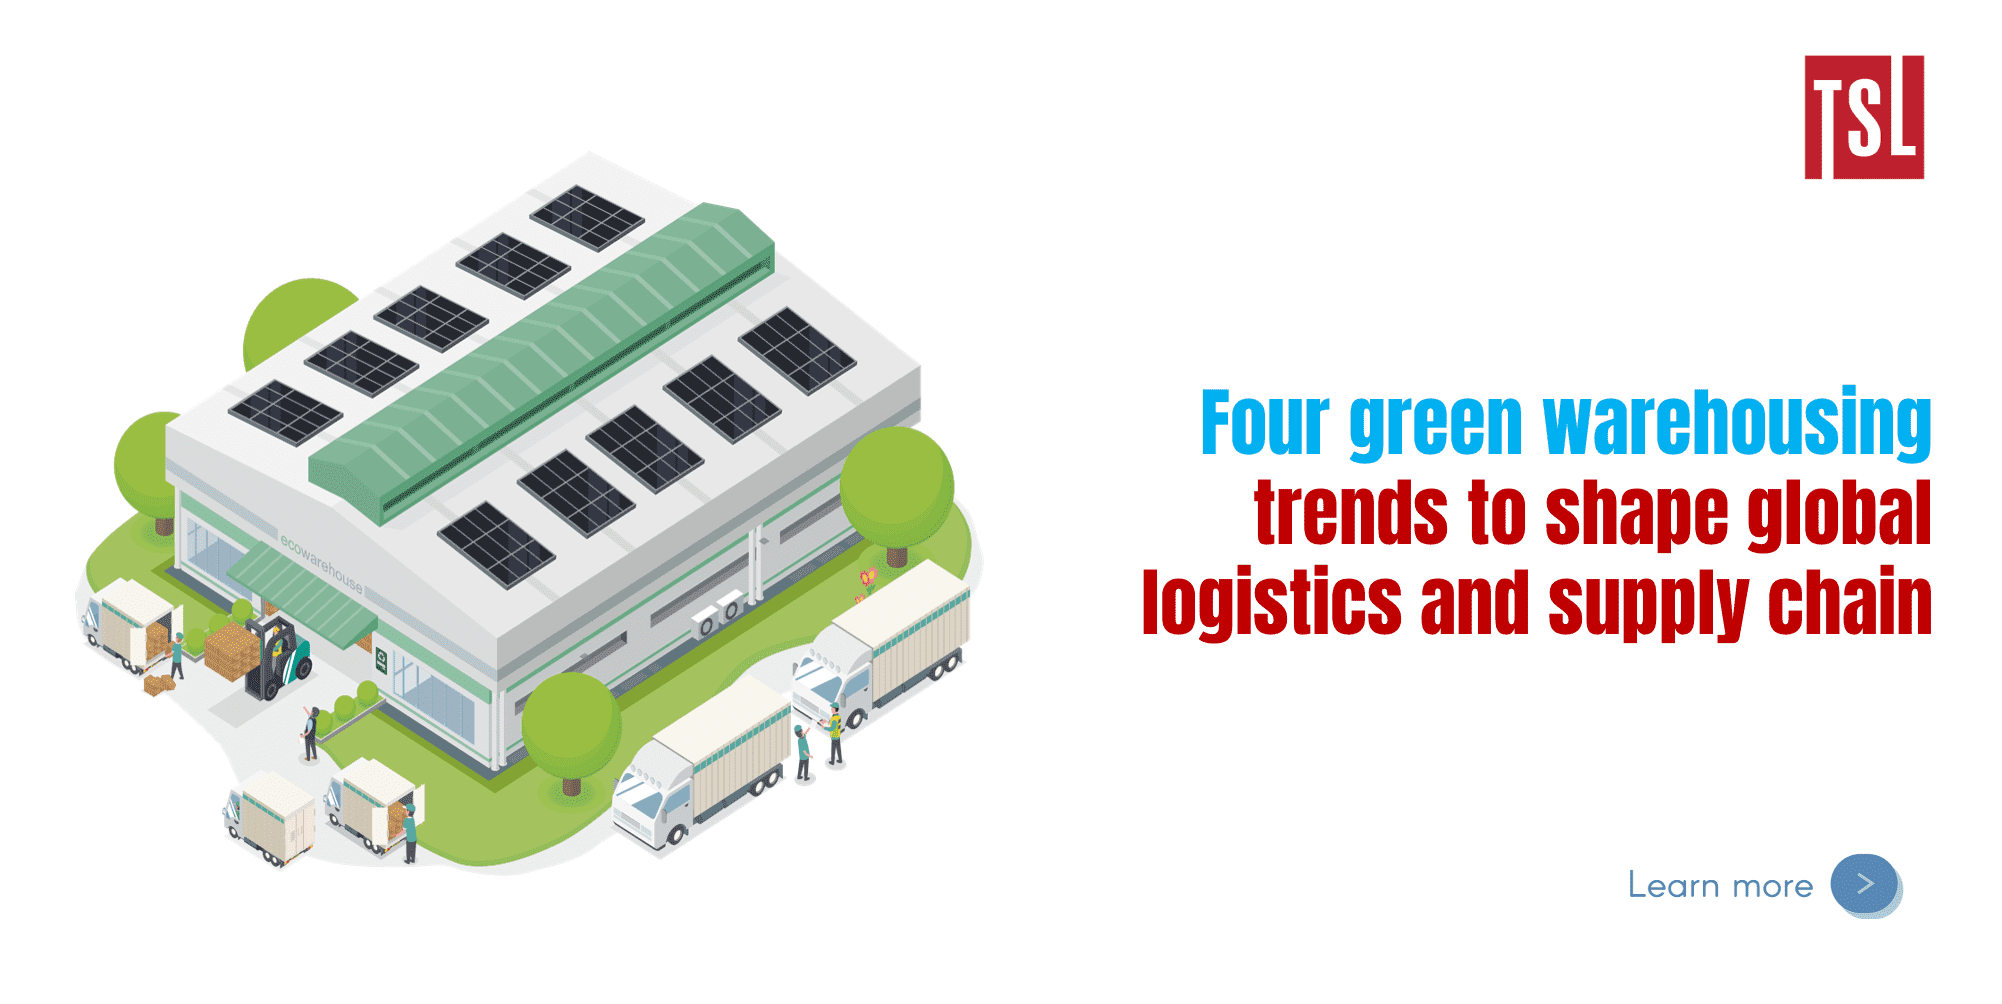 Four green warehousing trends to shape global logistics and supply chain